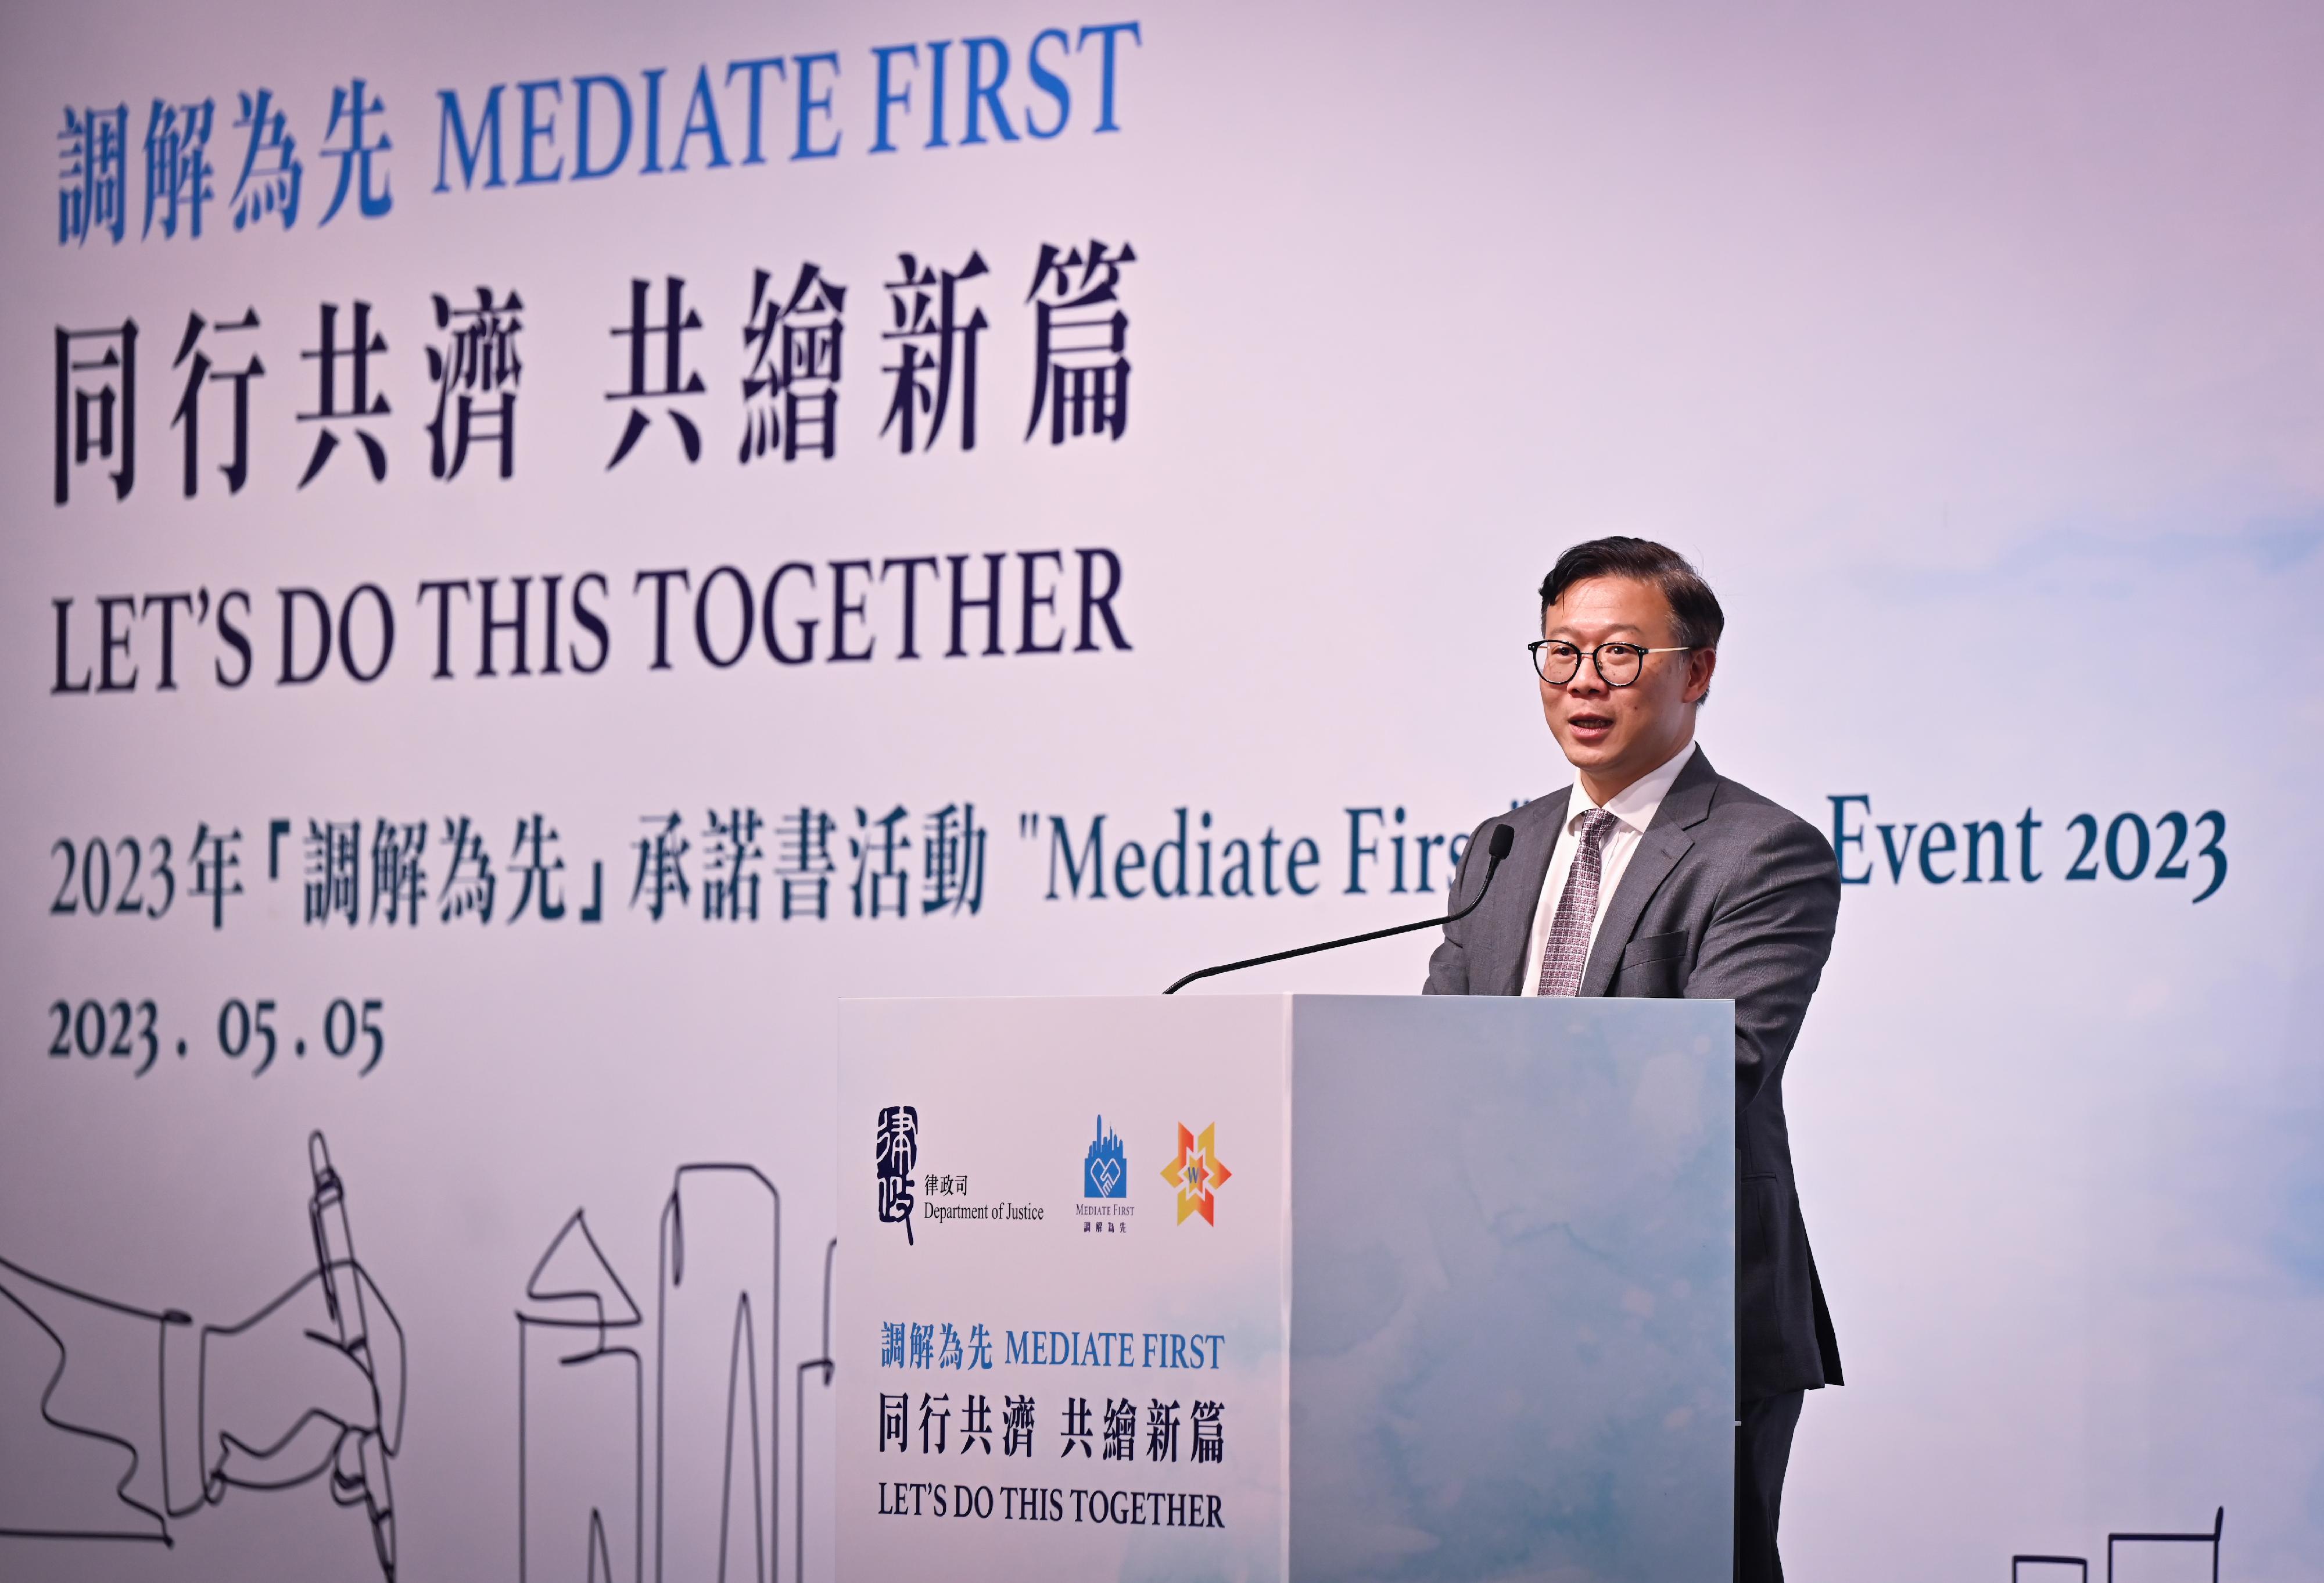 The biennial "Mediate First" Pledge Event organised by the Department of Justice was held today (May 5). Photo shows the Deputy Secretary for Justice, Mr Cheung Kwok-kwan, delivering his closing remarks.